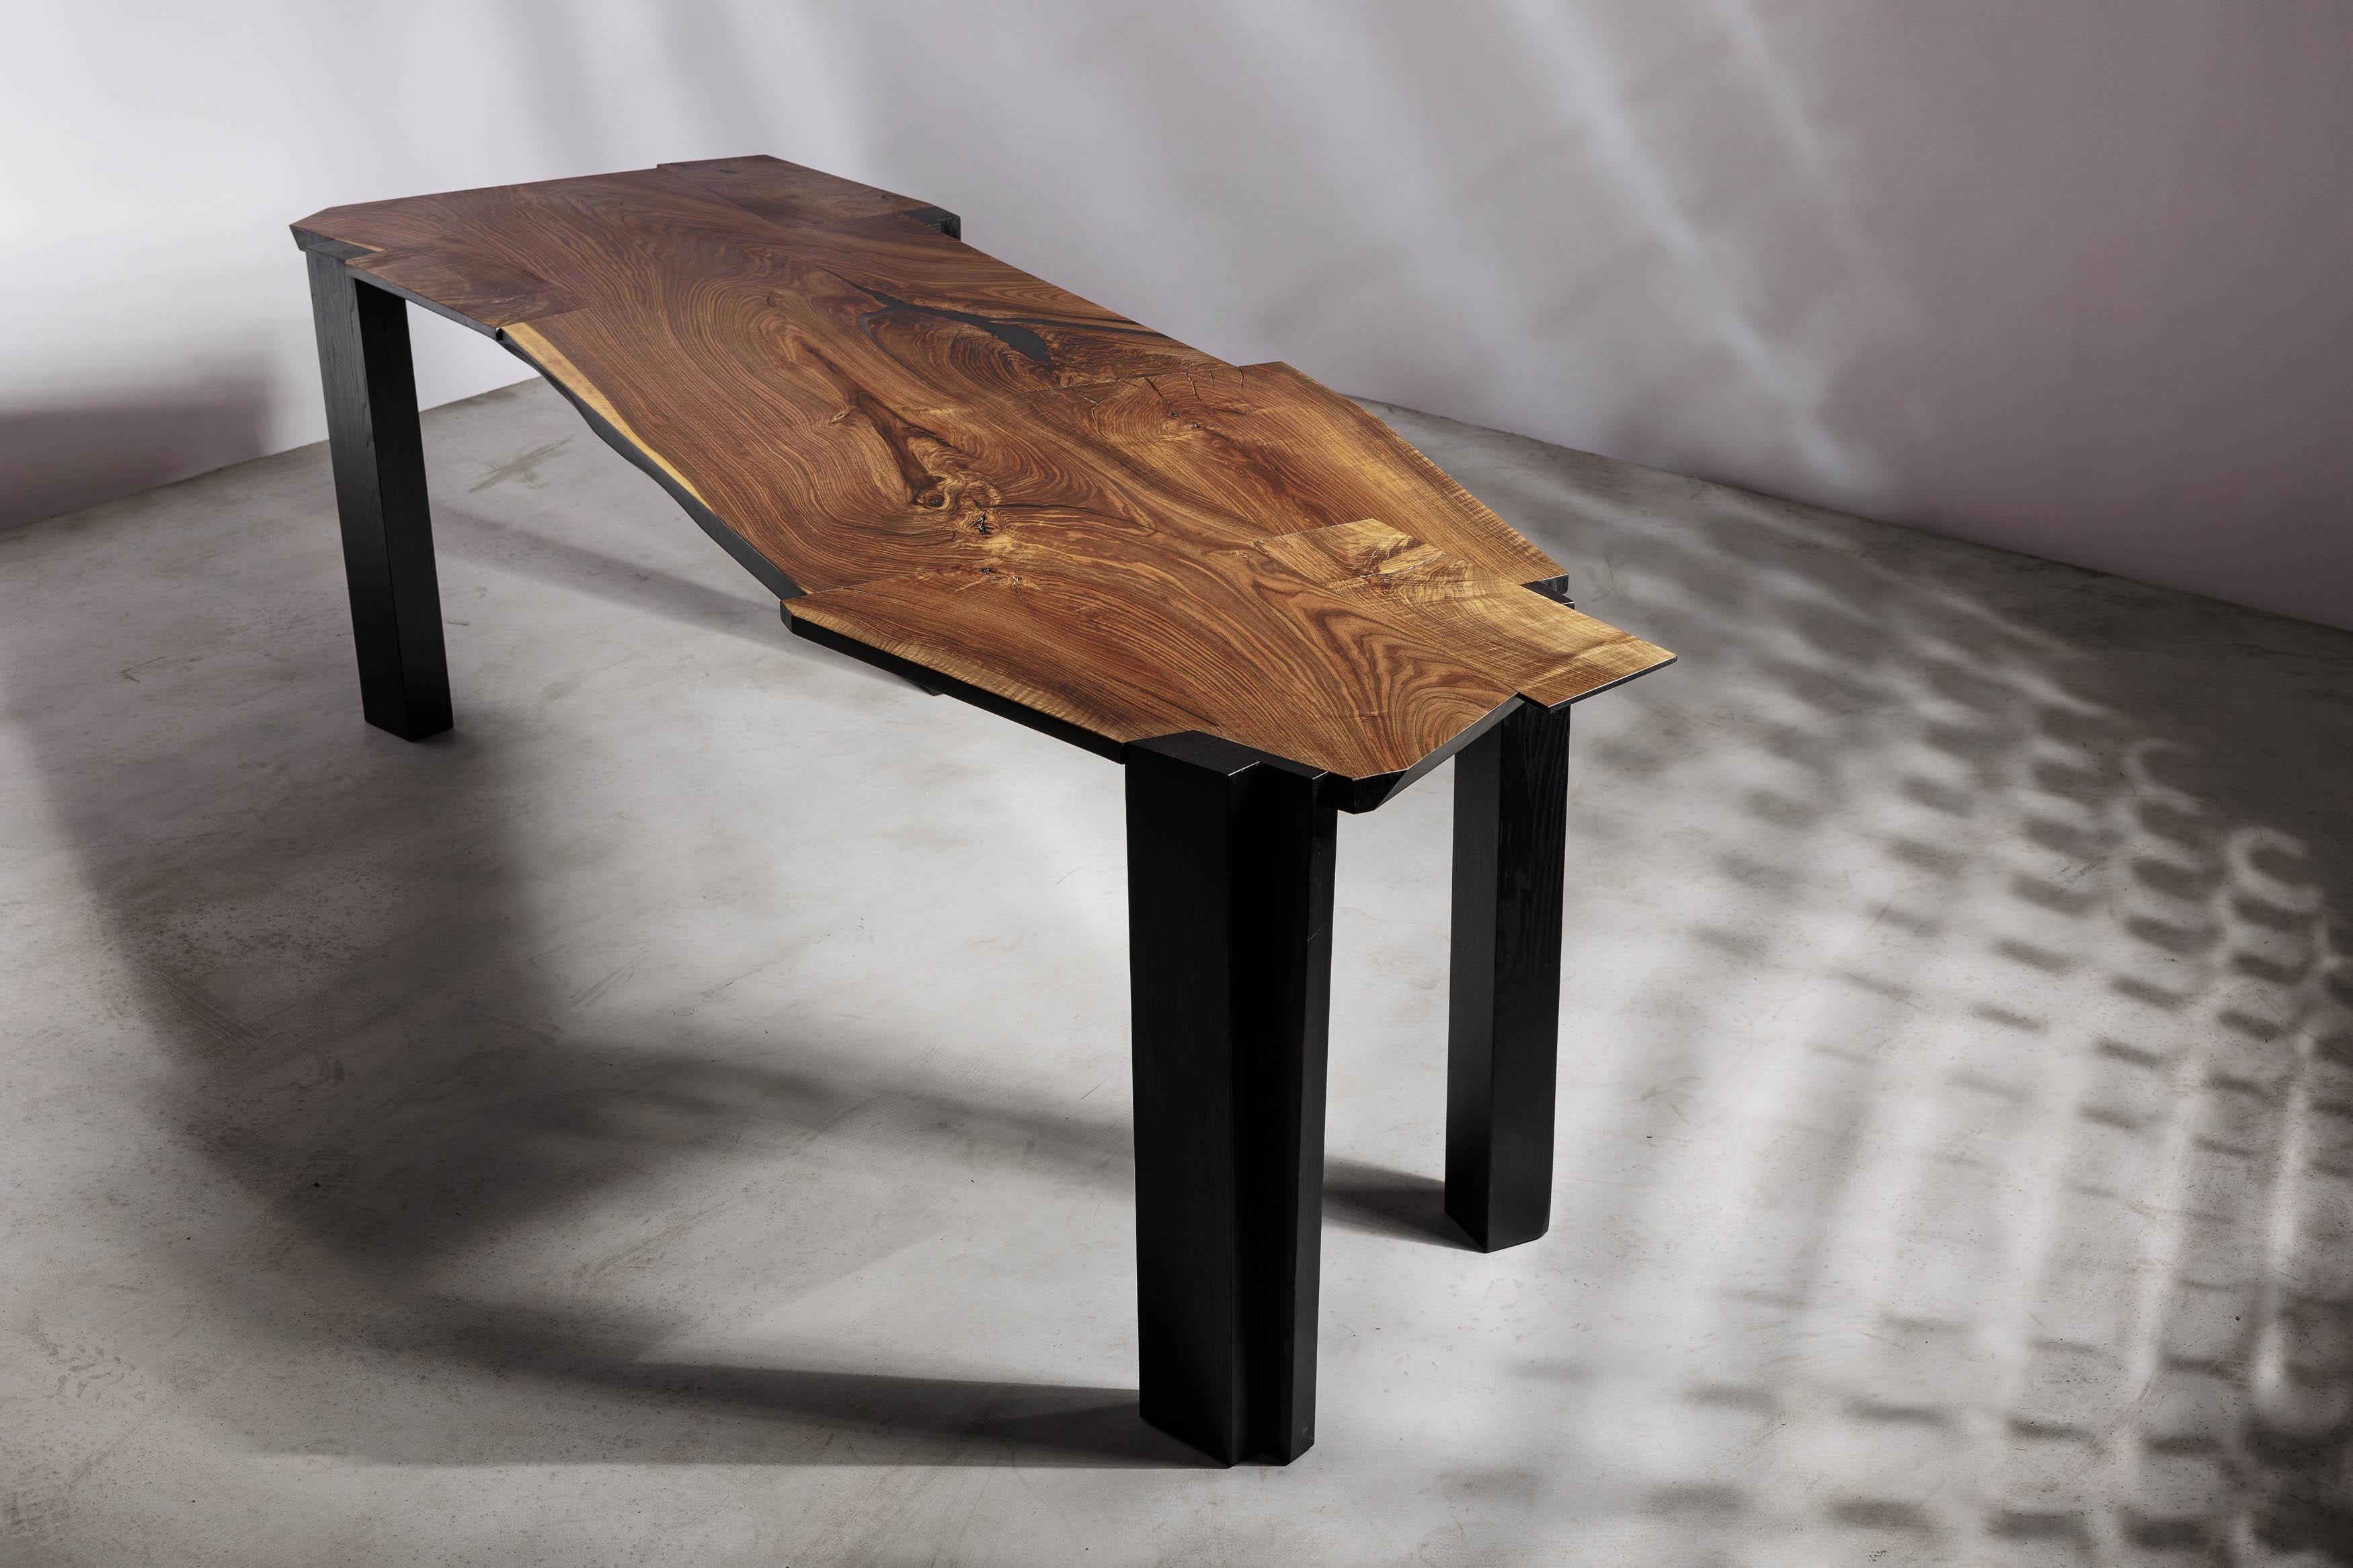 EM201 dining table by Eero Moss.
One of a kind.
Dimensions; W 265 x D 85 x H 77 cm.
Materials: Walnut, ash, India ink.
Finish: Natural oils.

18 Brut Collection

The latest collection by the artist is a tribute to the Brutalist movement,